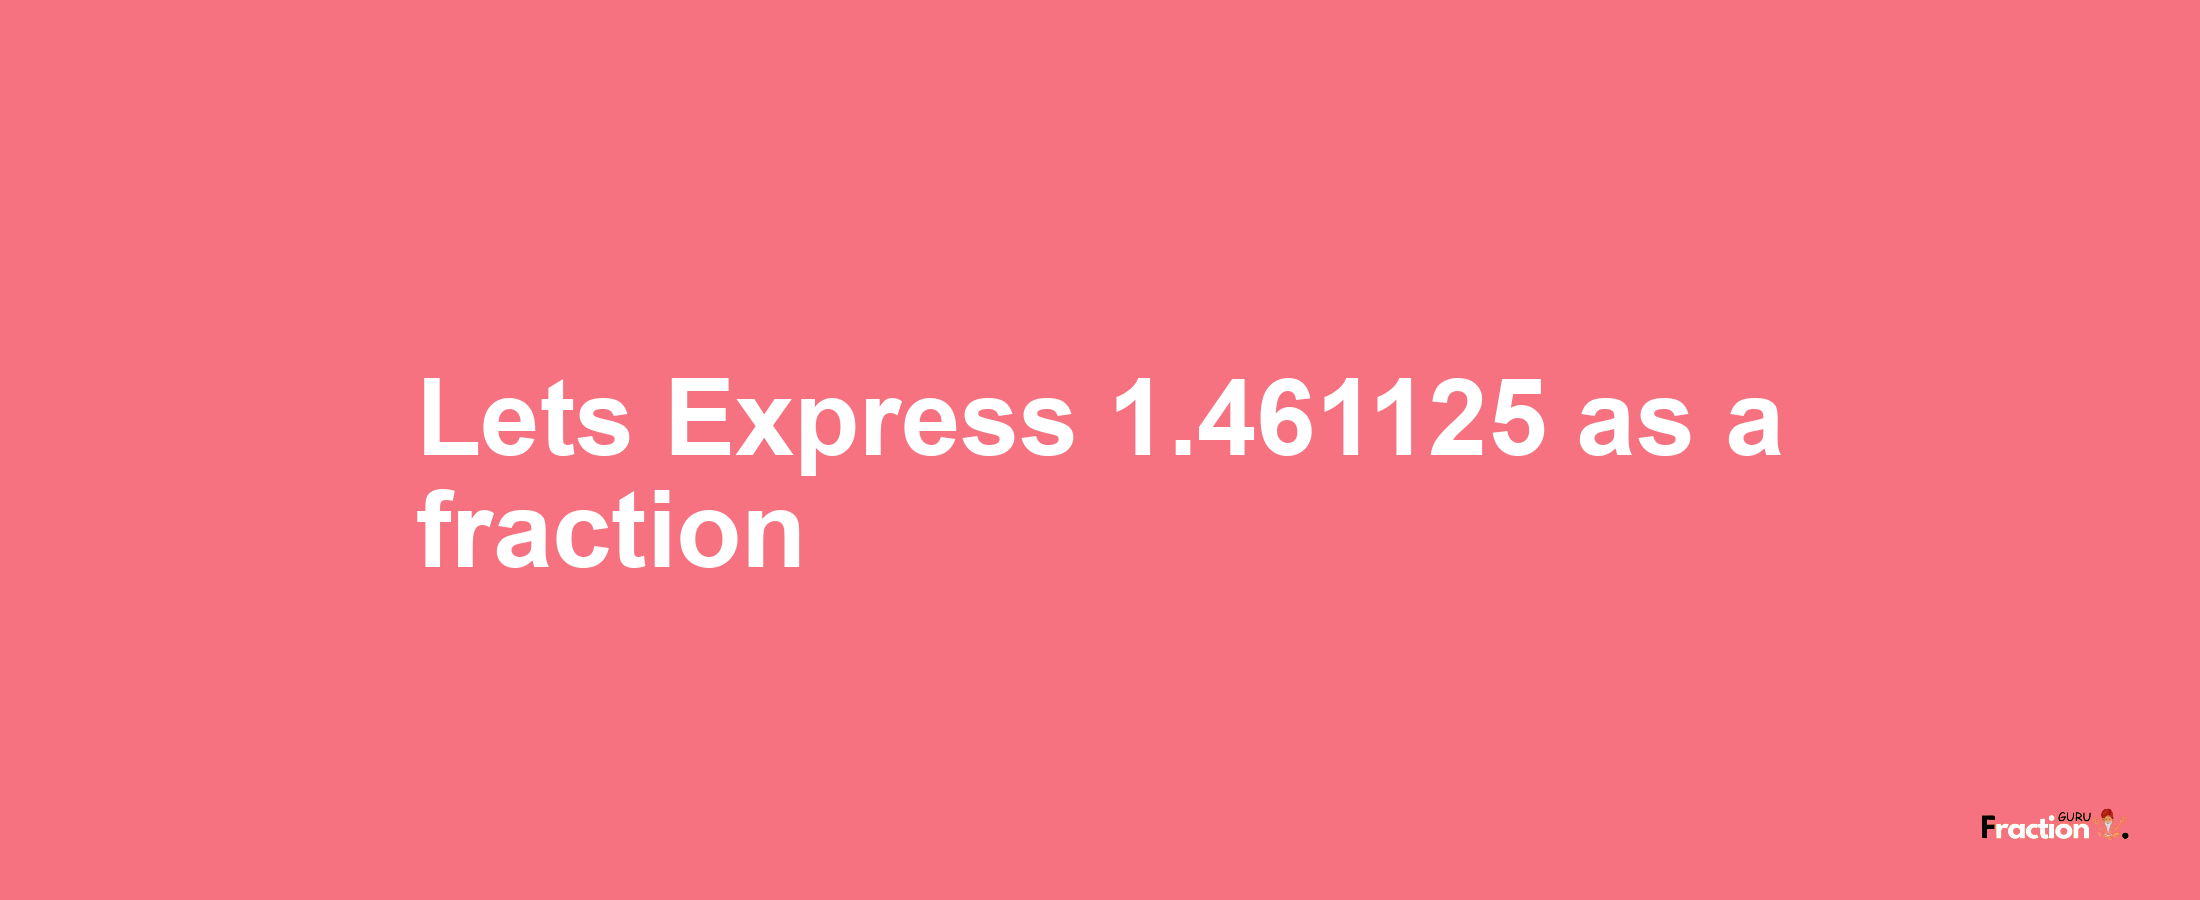 Lets Express 1.461125 as afraction